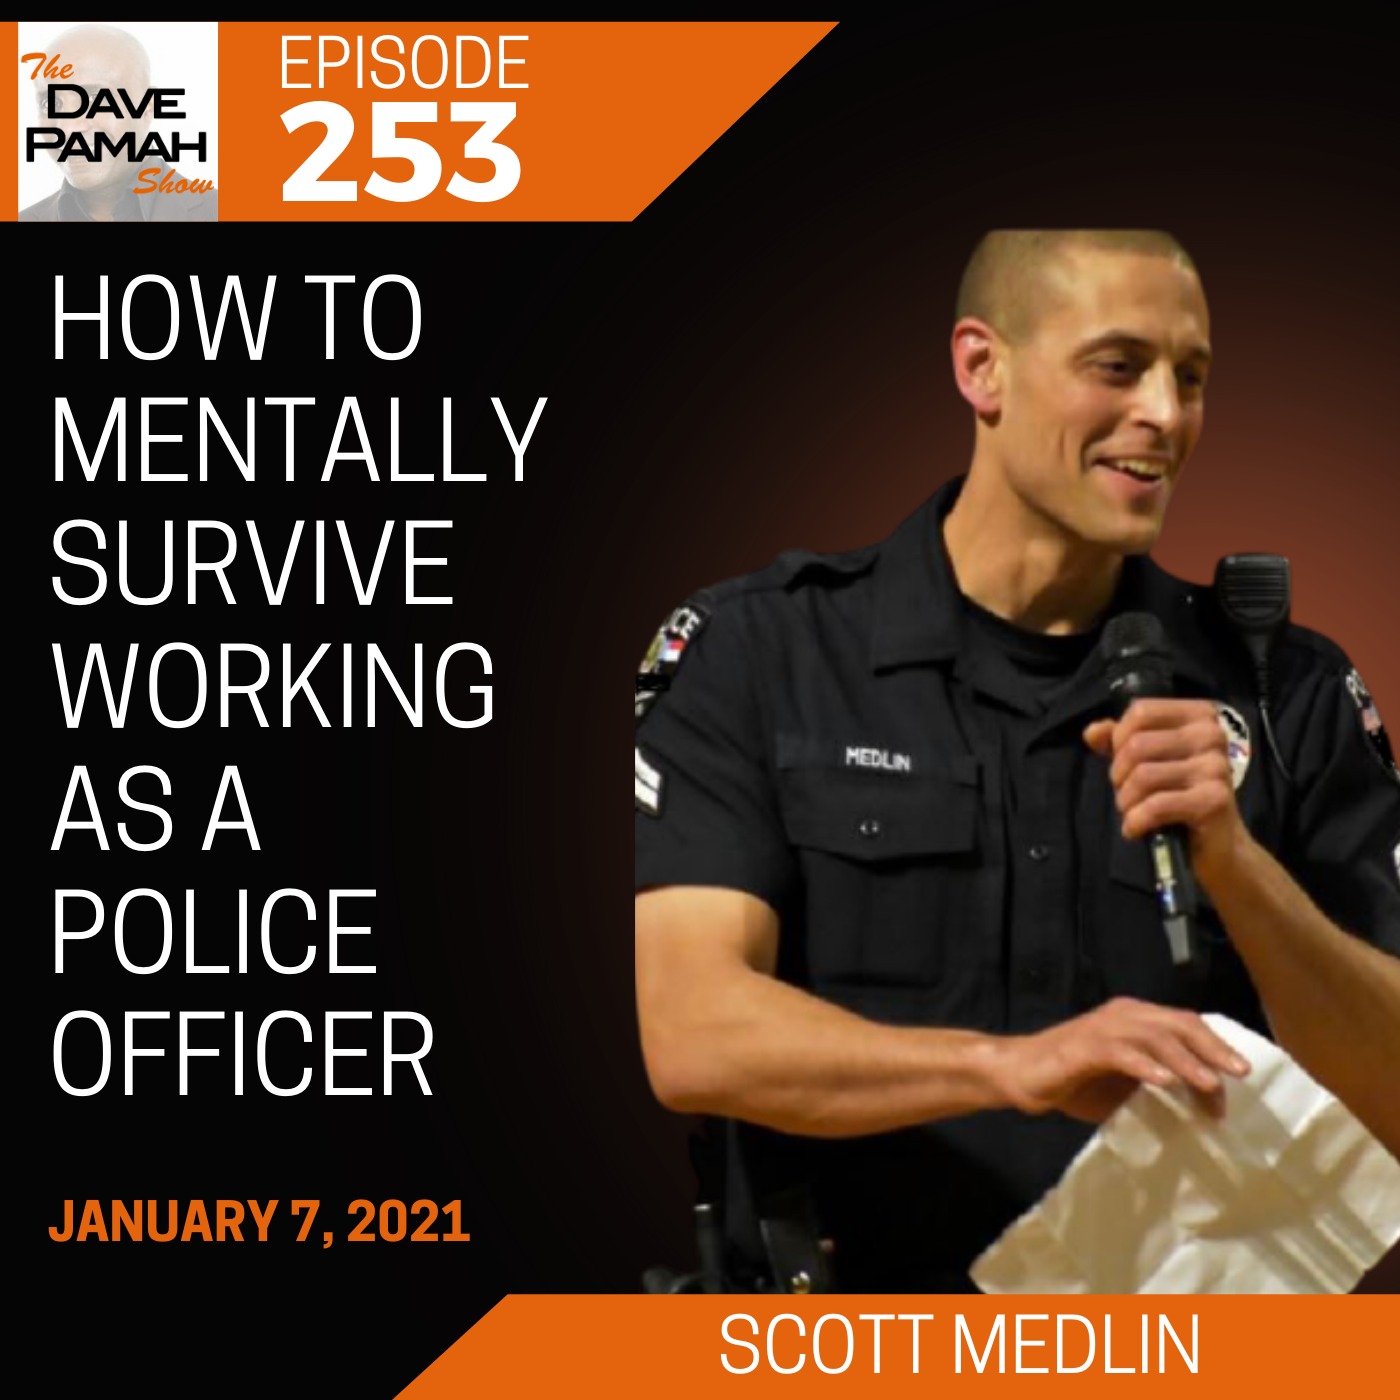 How To Mentally Survive Working as a Police Officer with Scott Medlin Image